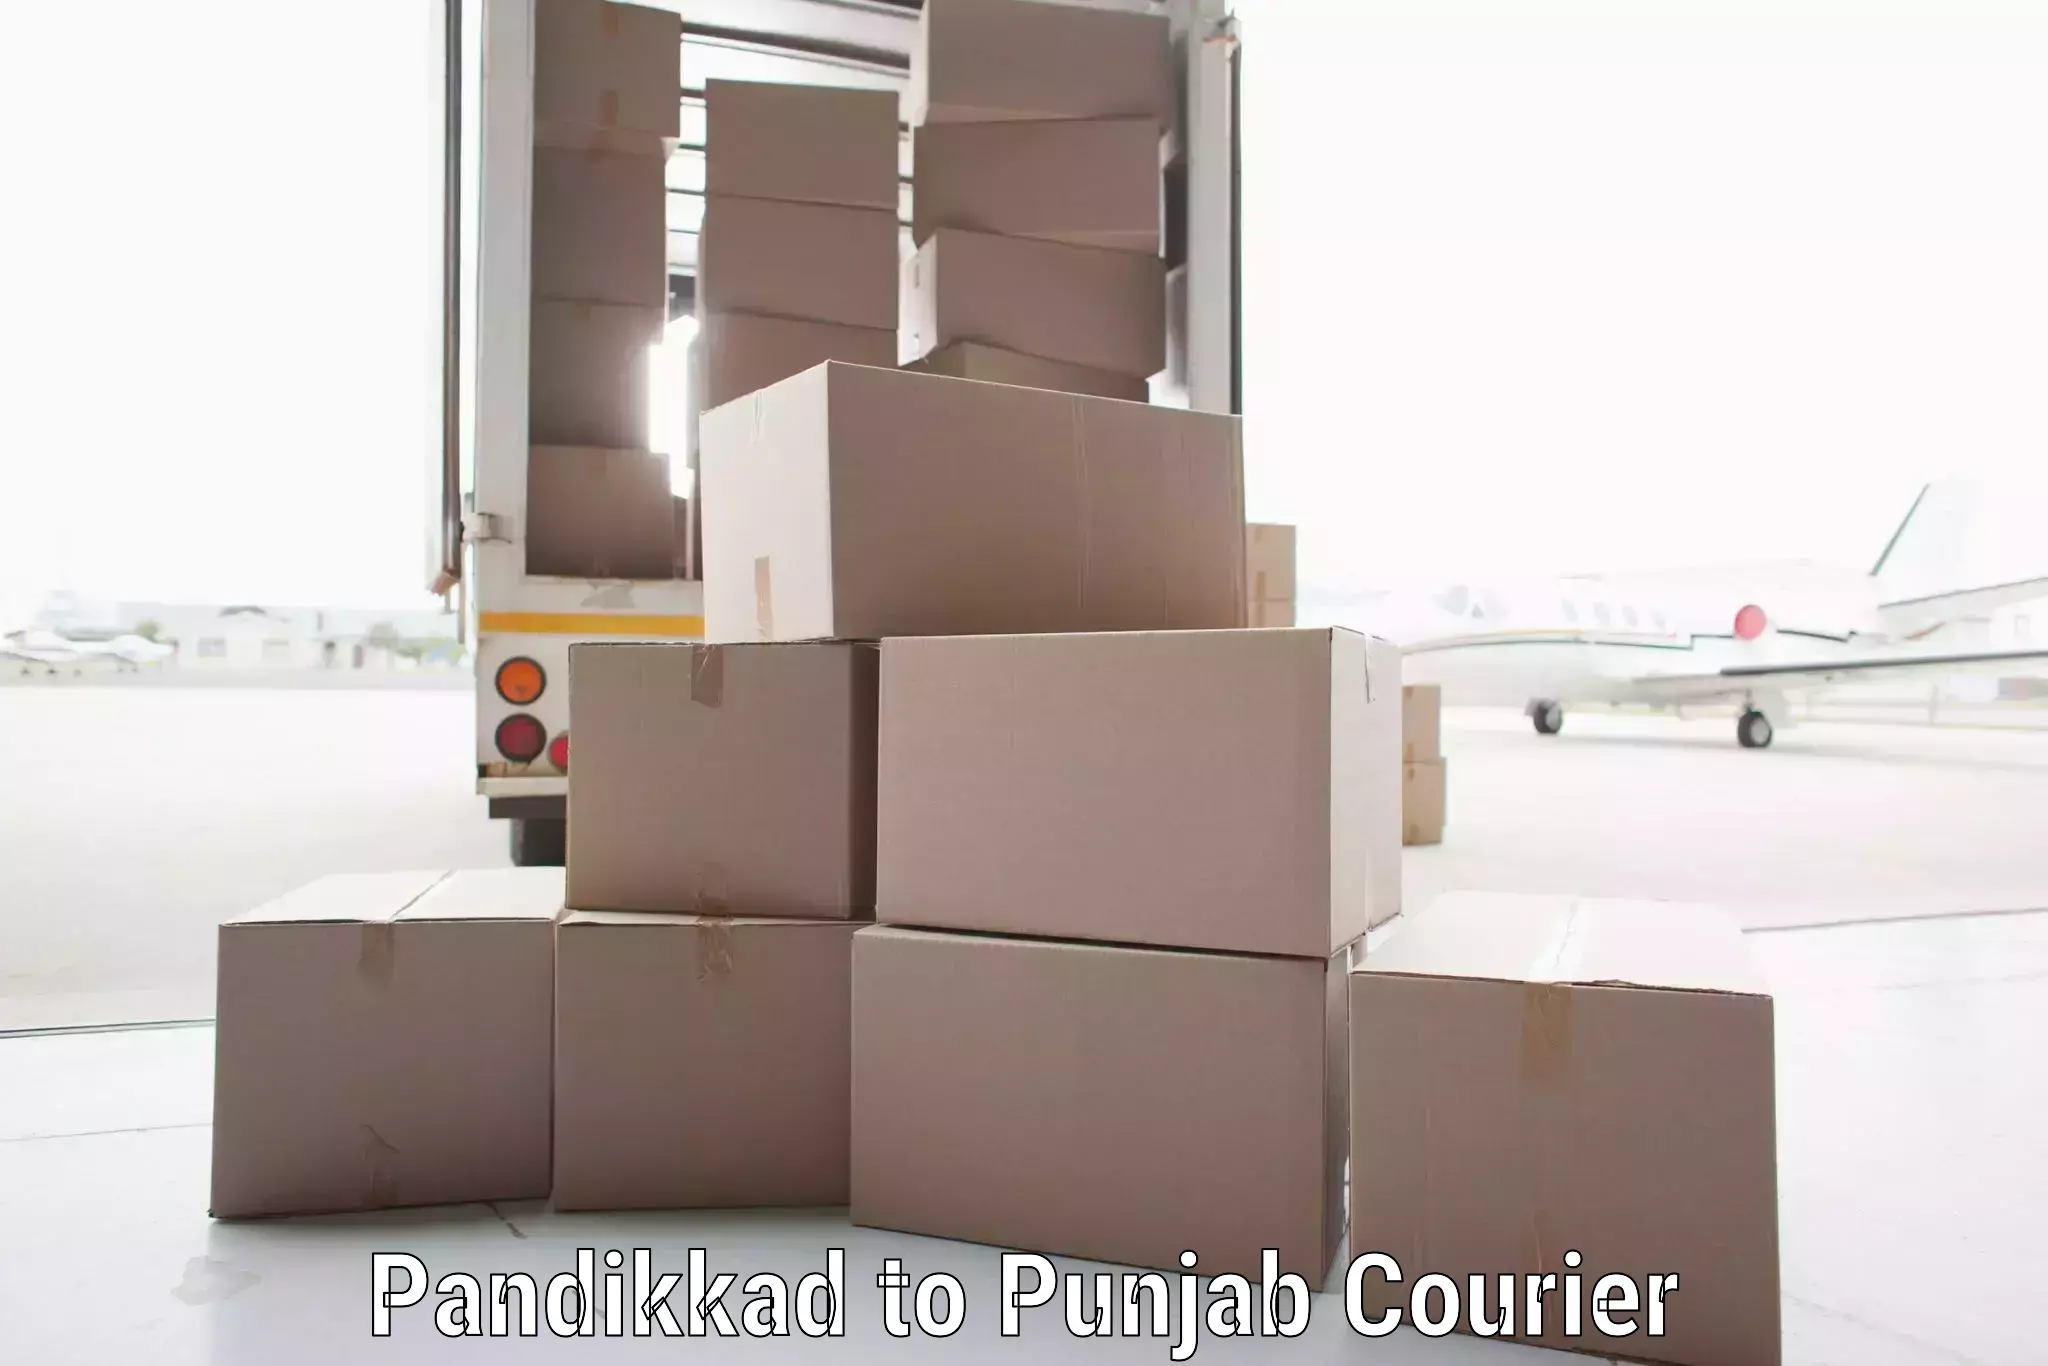 Fastest parcel delivery Pandikkad to Amritsar